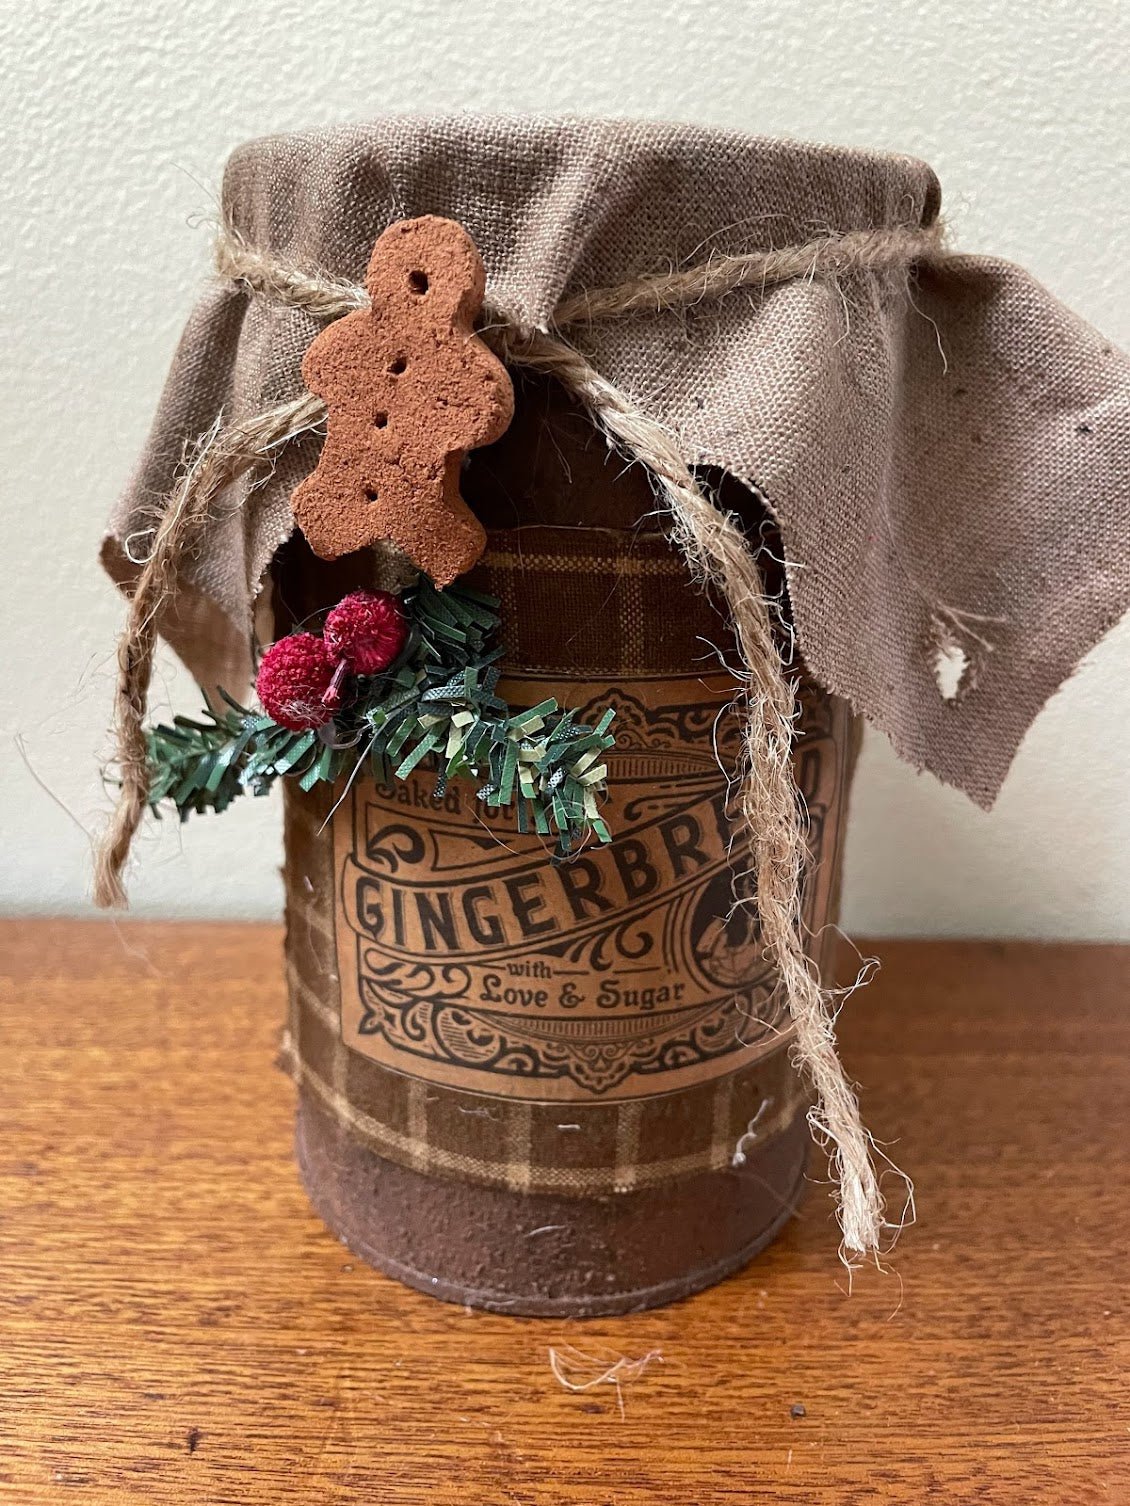 Primitive Handcrafted Colonial Christmas Love and Sugar Gingerbread Tin - The Primitive Pineapple Collection